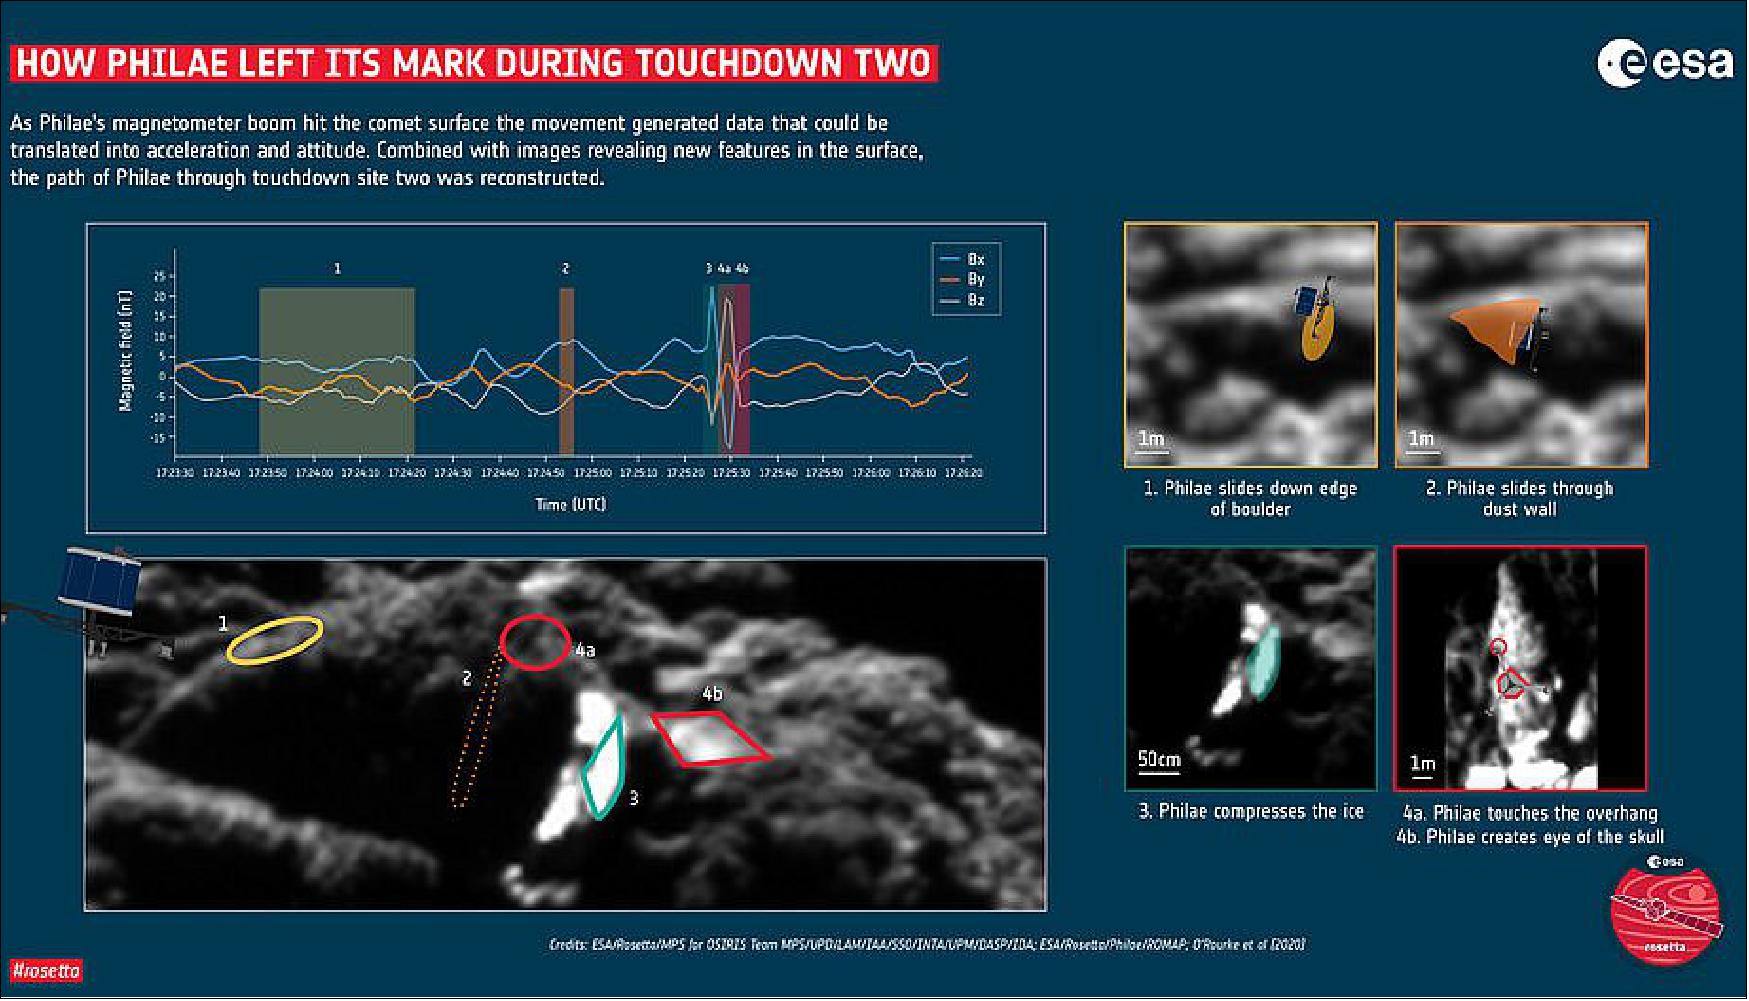 Figure 37: How Philae left its mark during touchdown two. This graphic presents the data collected by Philae’s ROMAP instrument – a magnetometer boom – during the time of the second touchdown on Comet 67P/Churyumov-Gerasimenko on 12 November 2014, matched with imagery showing evidence of the key moments of Philae’s interaction with the surface. Signatures were created in the magnetic data of the ROMAP boom relative to the lander body when the boom physically moved as it struck a surface (the boom sticks out 48 cm from the lander body). This created a characteristic set of spikes in the magnetic data, which provided an estimate of the duration of Philae stamping into the ice. The data could also be used to constrain the acceleration of Philae during these contacts. The data shows that Philae spent nearly two full minutes at touchdown site two, making contact with the surface multiple times. - The data plot is labelled with five different events, corresponding to the imagery. Initially travelling in a downward direction, Philae slides down the edge of a boulder (1) and flips vertically, rotating like a windmill to pass between two boulders (2) exposing layers of ice in the crevice walls with its feet. A dust wall was created by the windmill action, pushing through the dust that had heaped up between the boulders up to that point in time. The crevice is about 2.5 m long and is curved with a width of 1-1.5 m, allowing Philae to pass through. Philae then stamps a 25 cm imprint of the top of the lander into the comet’s surface (3) – a hole made by the top of the SD2 (Sampling, Drilling and Distribution device) tower that sticks up above the top of Philae can be recognized. Philae then climbed out of the crevice, being pushed down once more by an overhang (4a), knocking off material in the process, with its top surface then creating an impression in the dust corresponding to the ‘eye’ of the feature that resembles a skull face (4b). The ROMAP data also reveal information about the speed and direction of travel. When Philae first entered the region it was travelling downwards at 20 cm/s and forwards at 10 cm/s. When it left the area it was travelling upwards at less than 1 cm/s and forwards at 9 cm/s. It never flew higher than one meter above the surface in its final flight to touchdown point three, 30 m away (image credit: ESA/Rosetta/MPS for OSIRIS Team MPS/UPD/LAM/IAA/SSO/INTA/UPM/DASP/IDA; Data: ESA/Rosetta/Philae/ROMAP; Analysis: O’Rourke et al (2020)